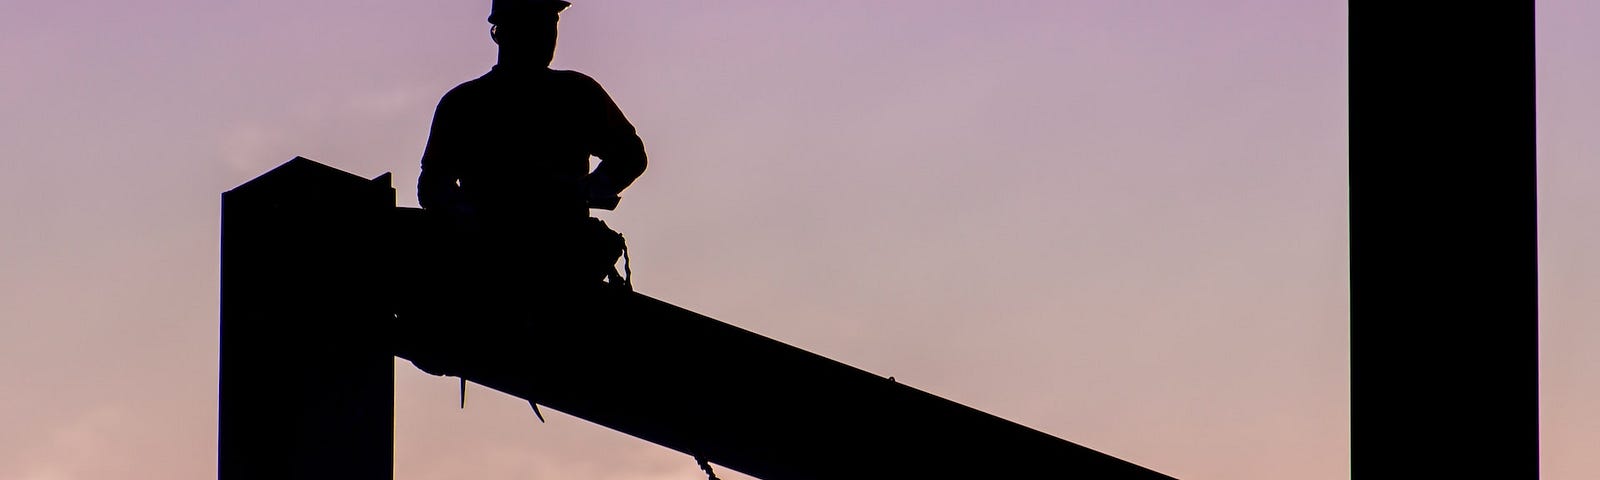 Silhouette of a construction worker sitting  on a high girder against a pink sky.